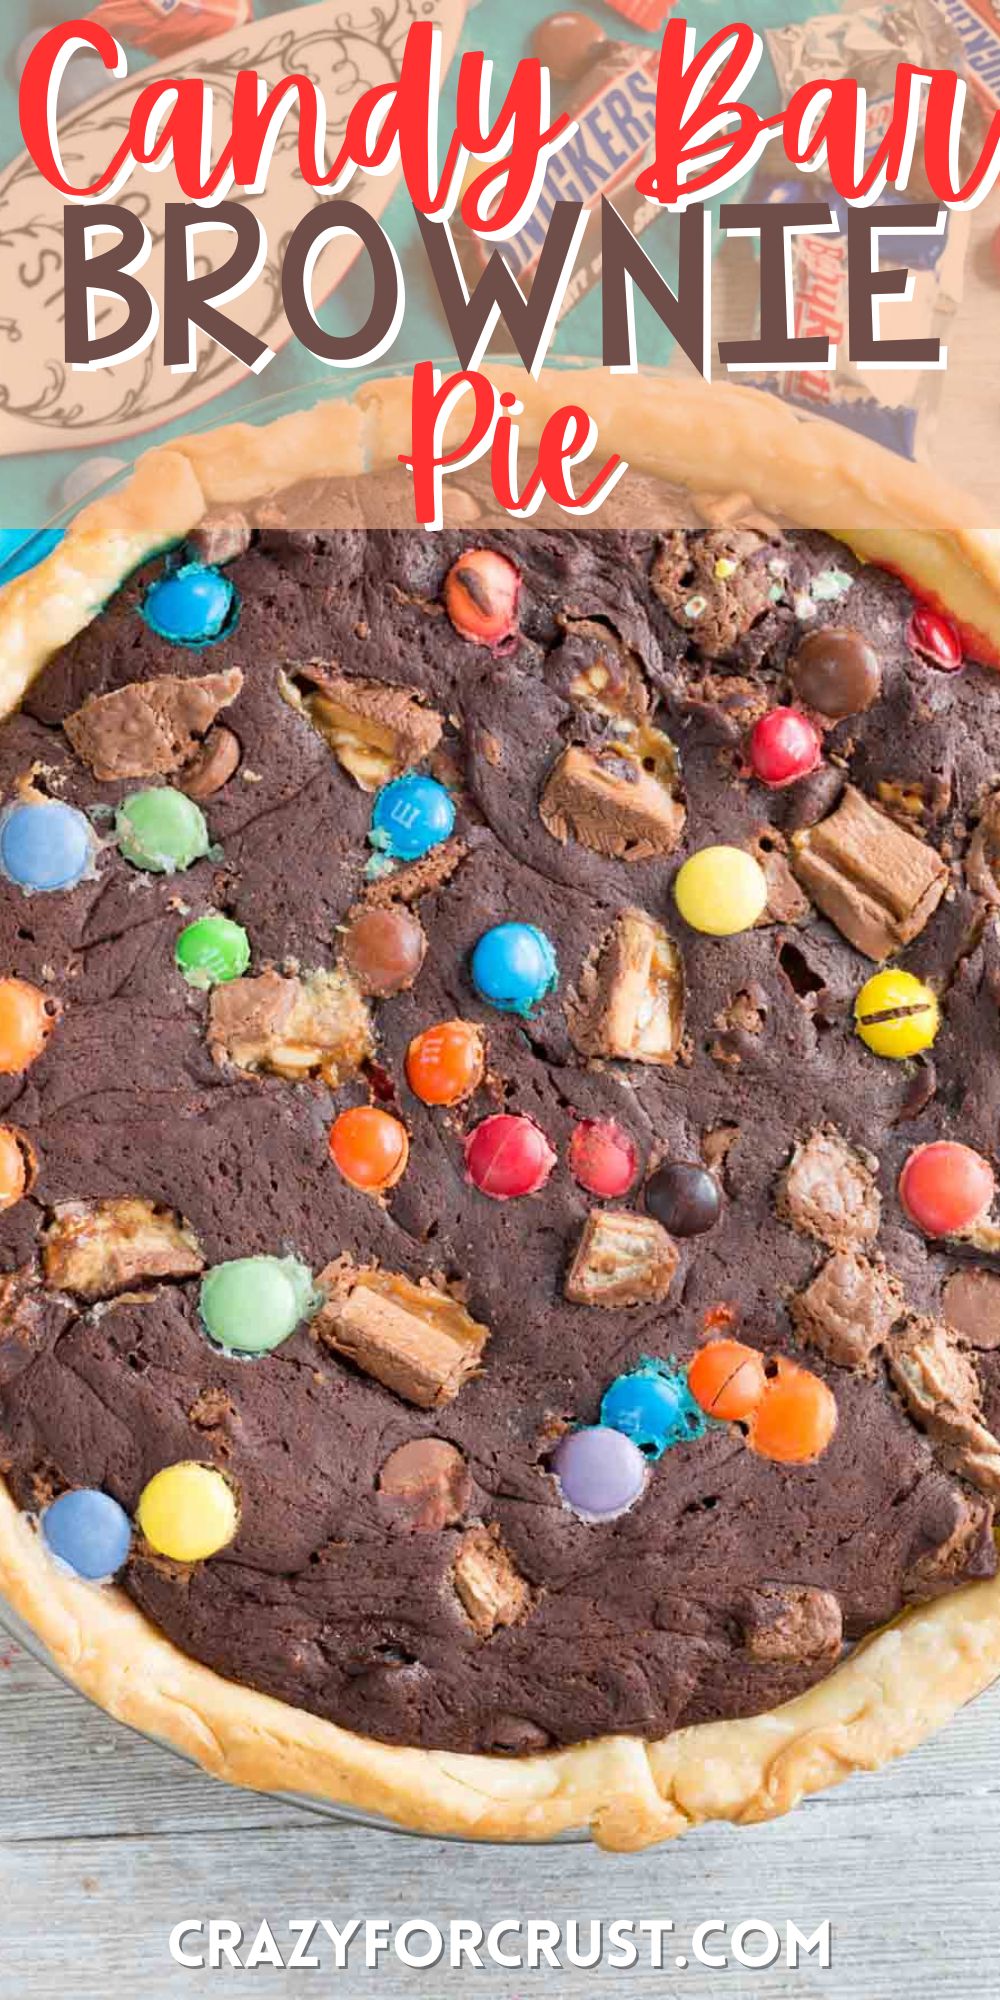 brownie pie with colorful m&ms and candy baked in with words on the image.